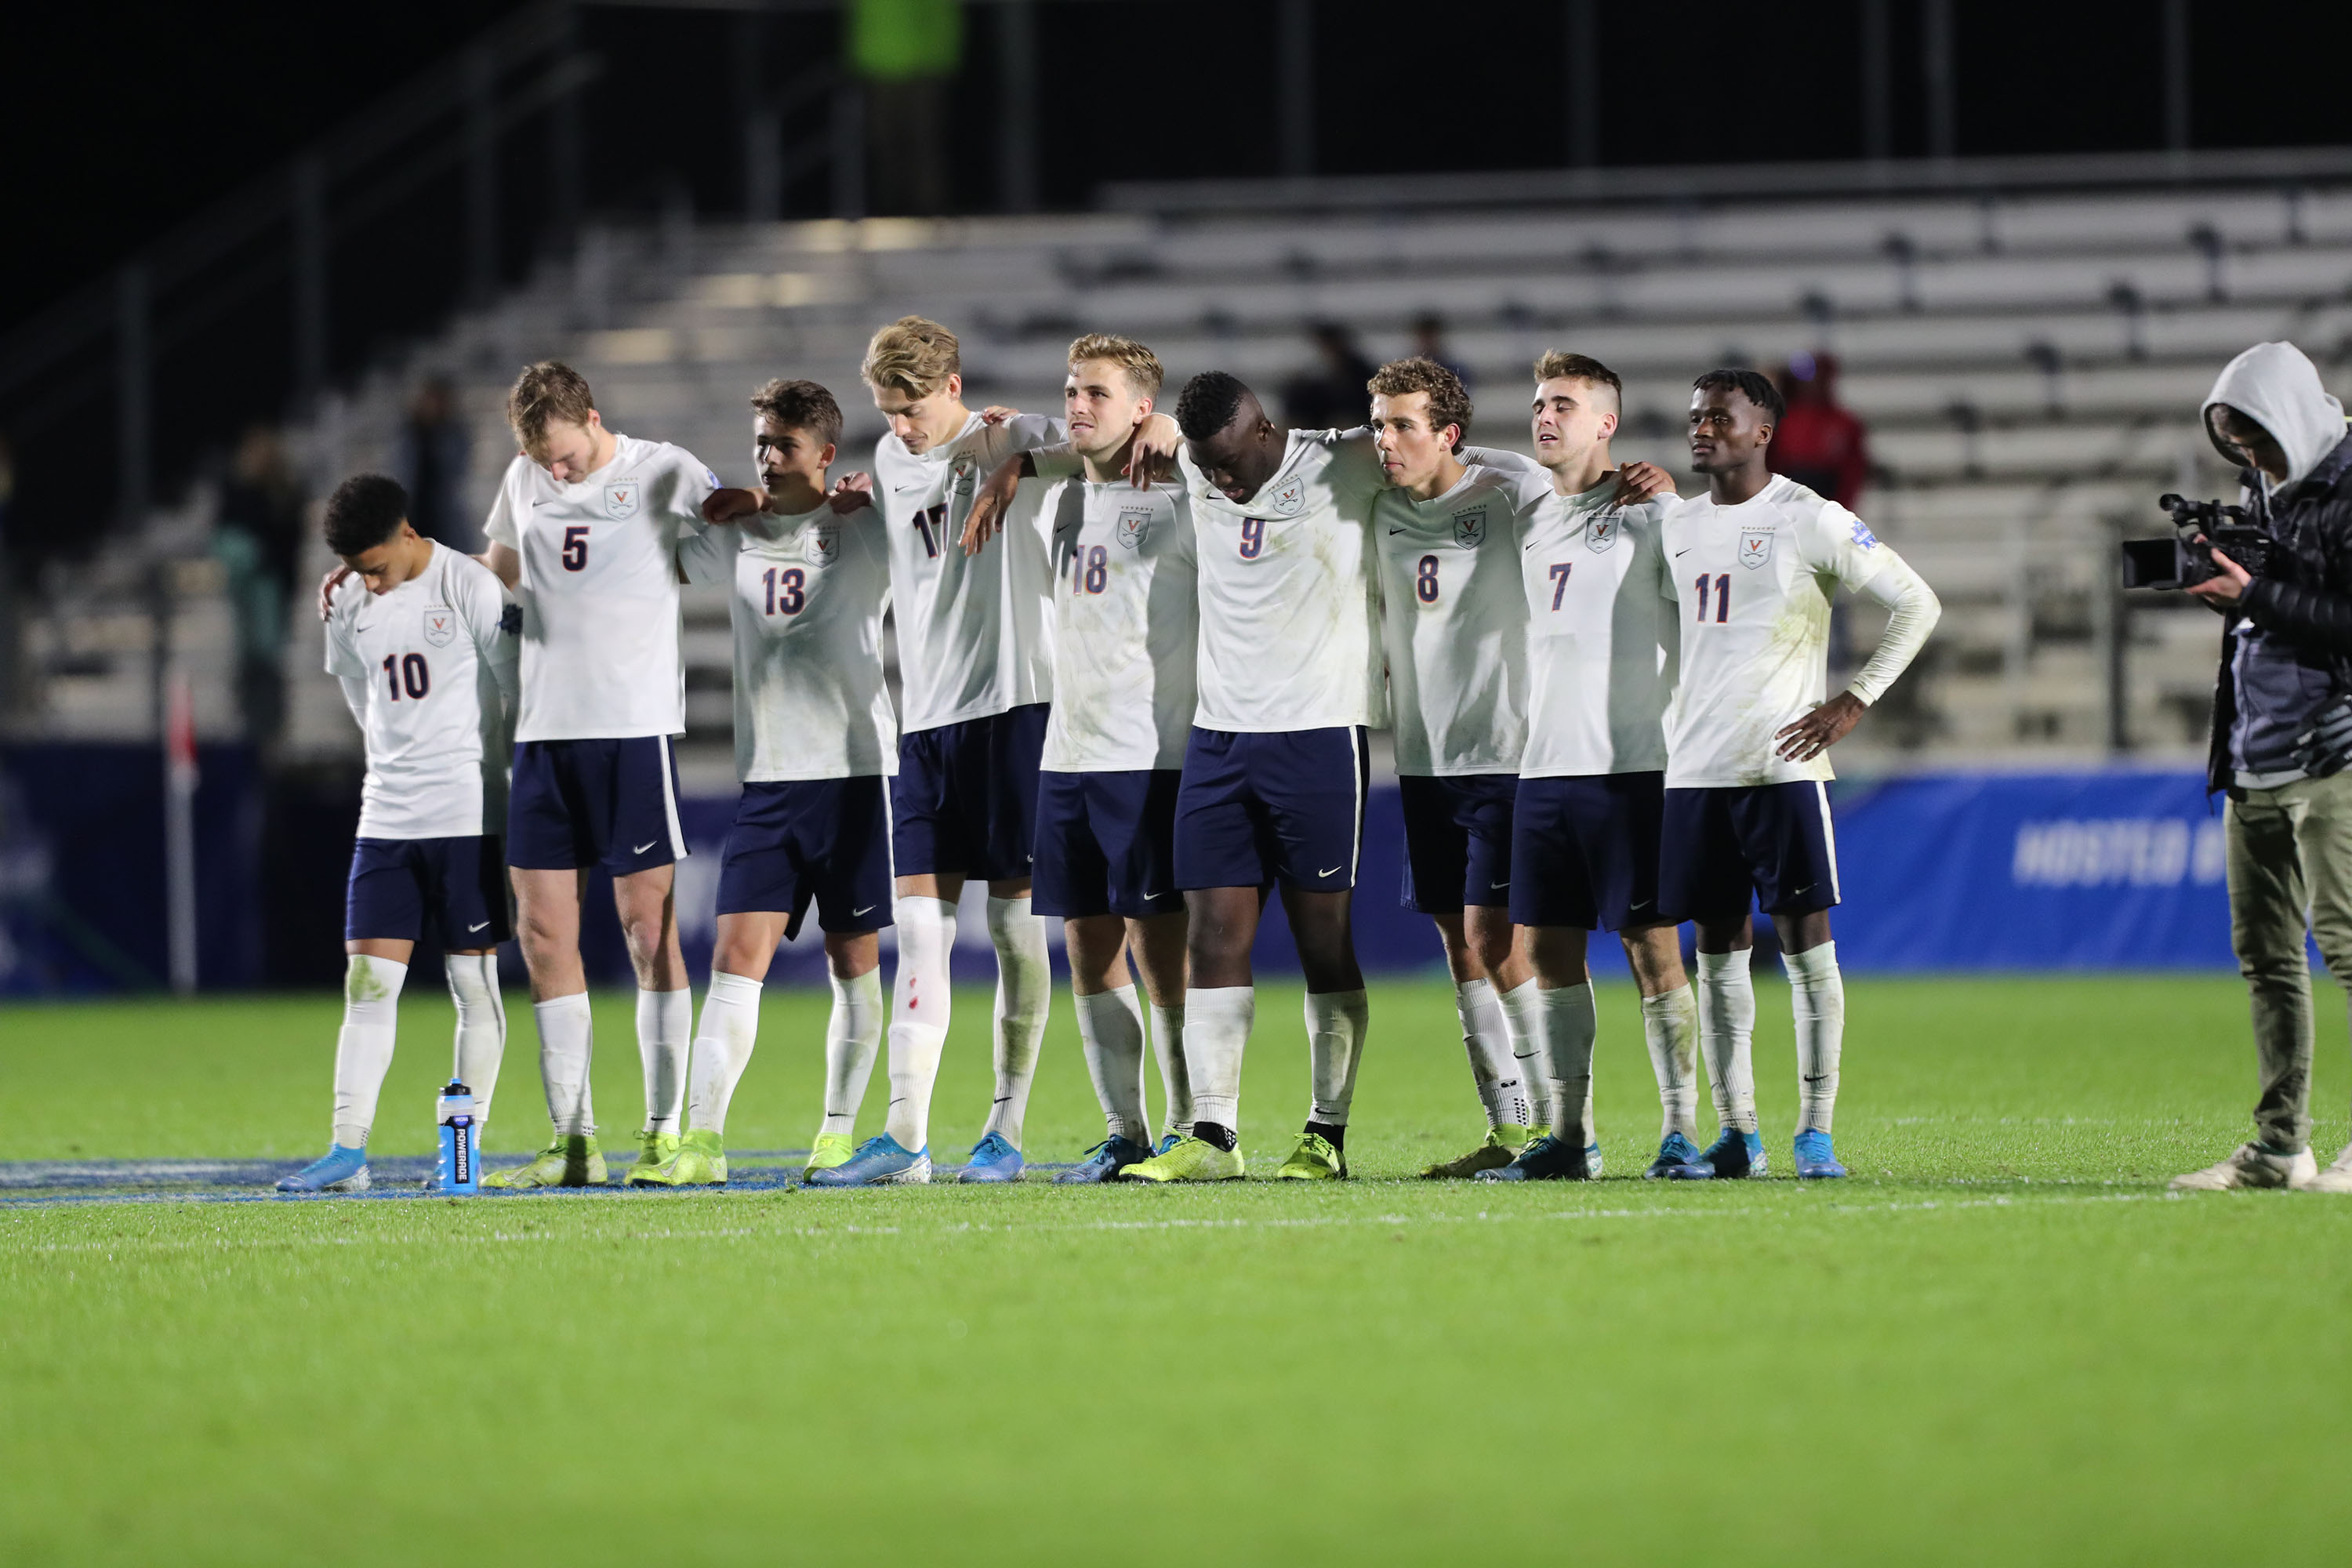 UVA Men's soccer team stand in a line with arms over each others shoulders after a game